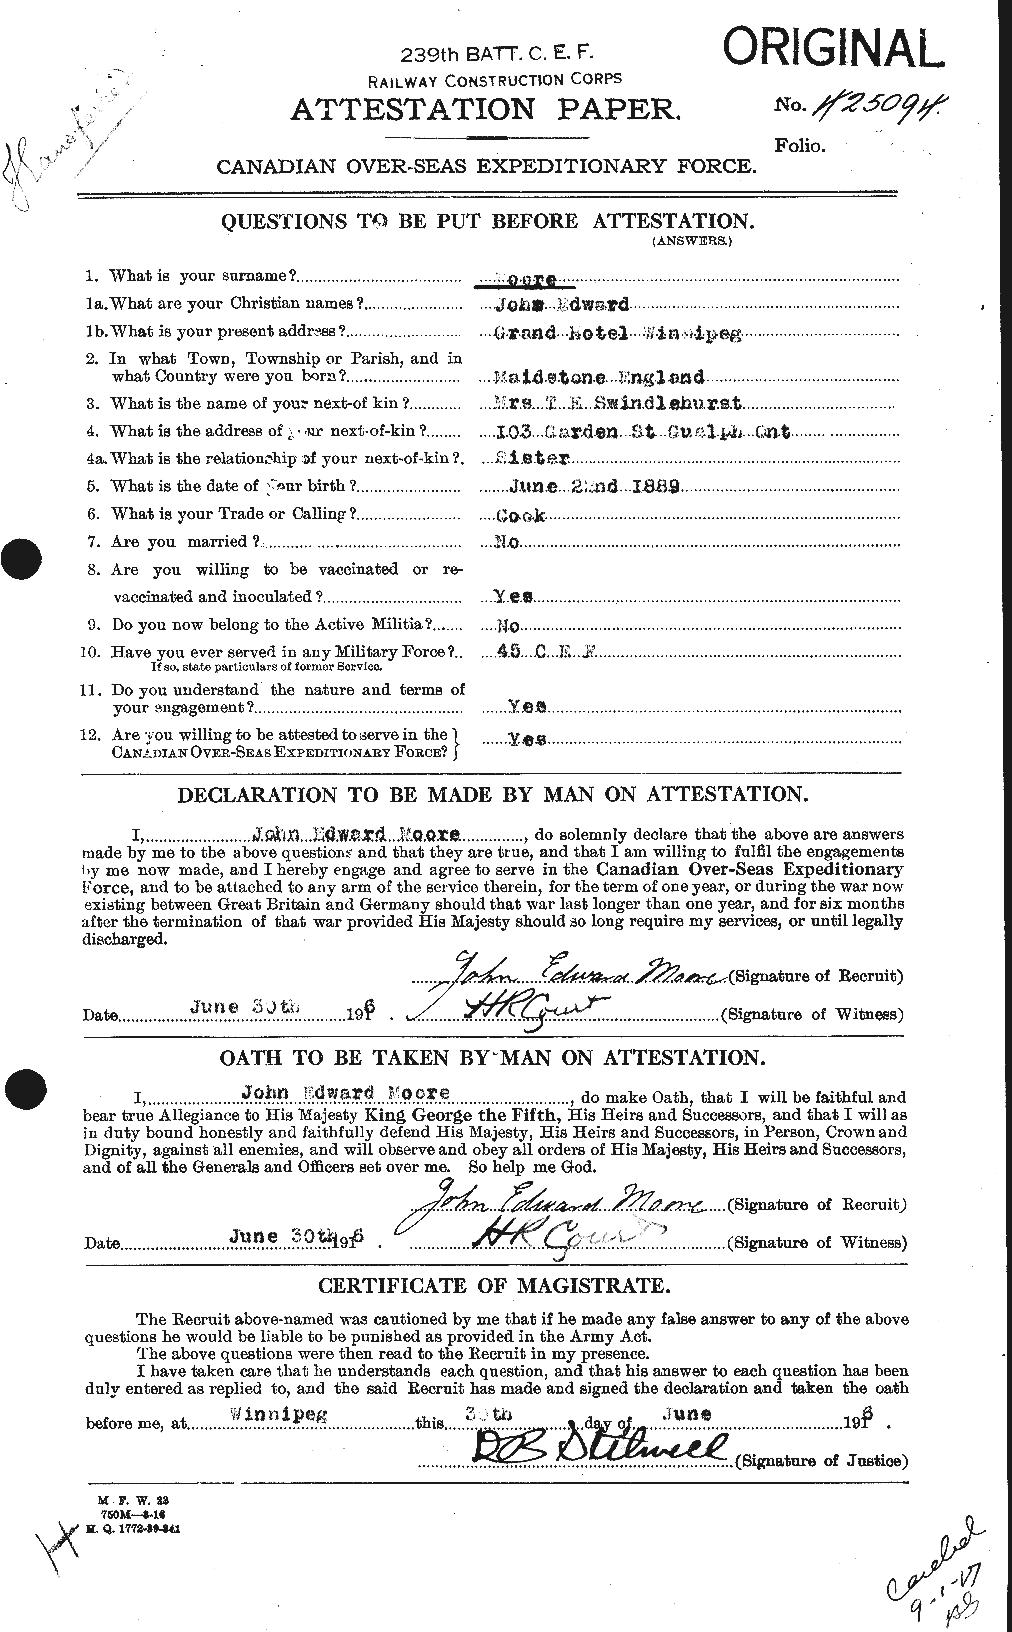 Personnel Records of the First World War - CEF 503277a